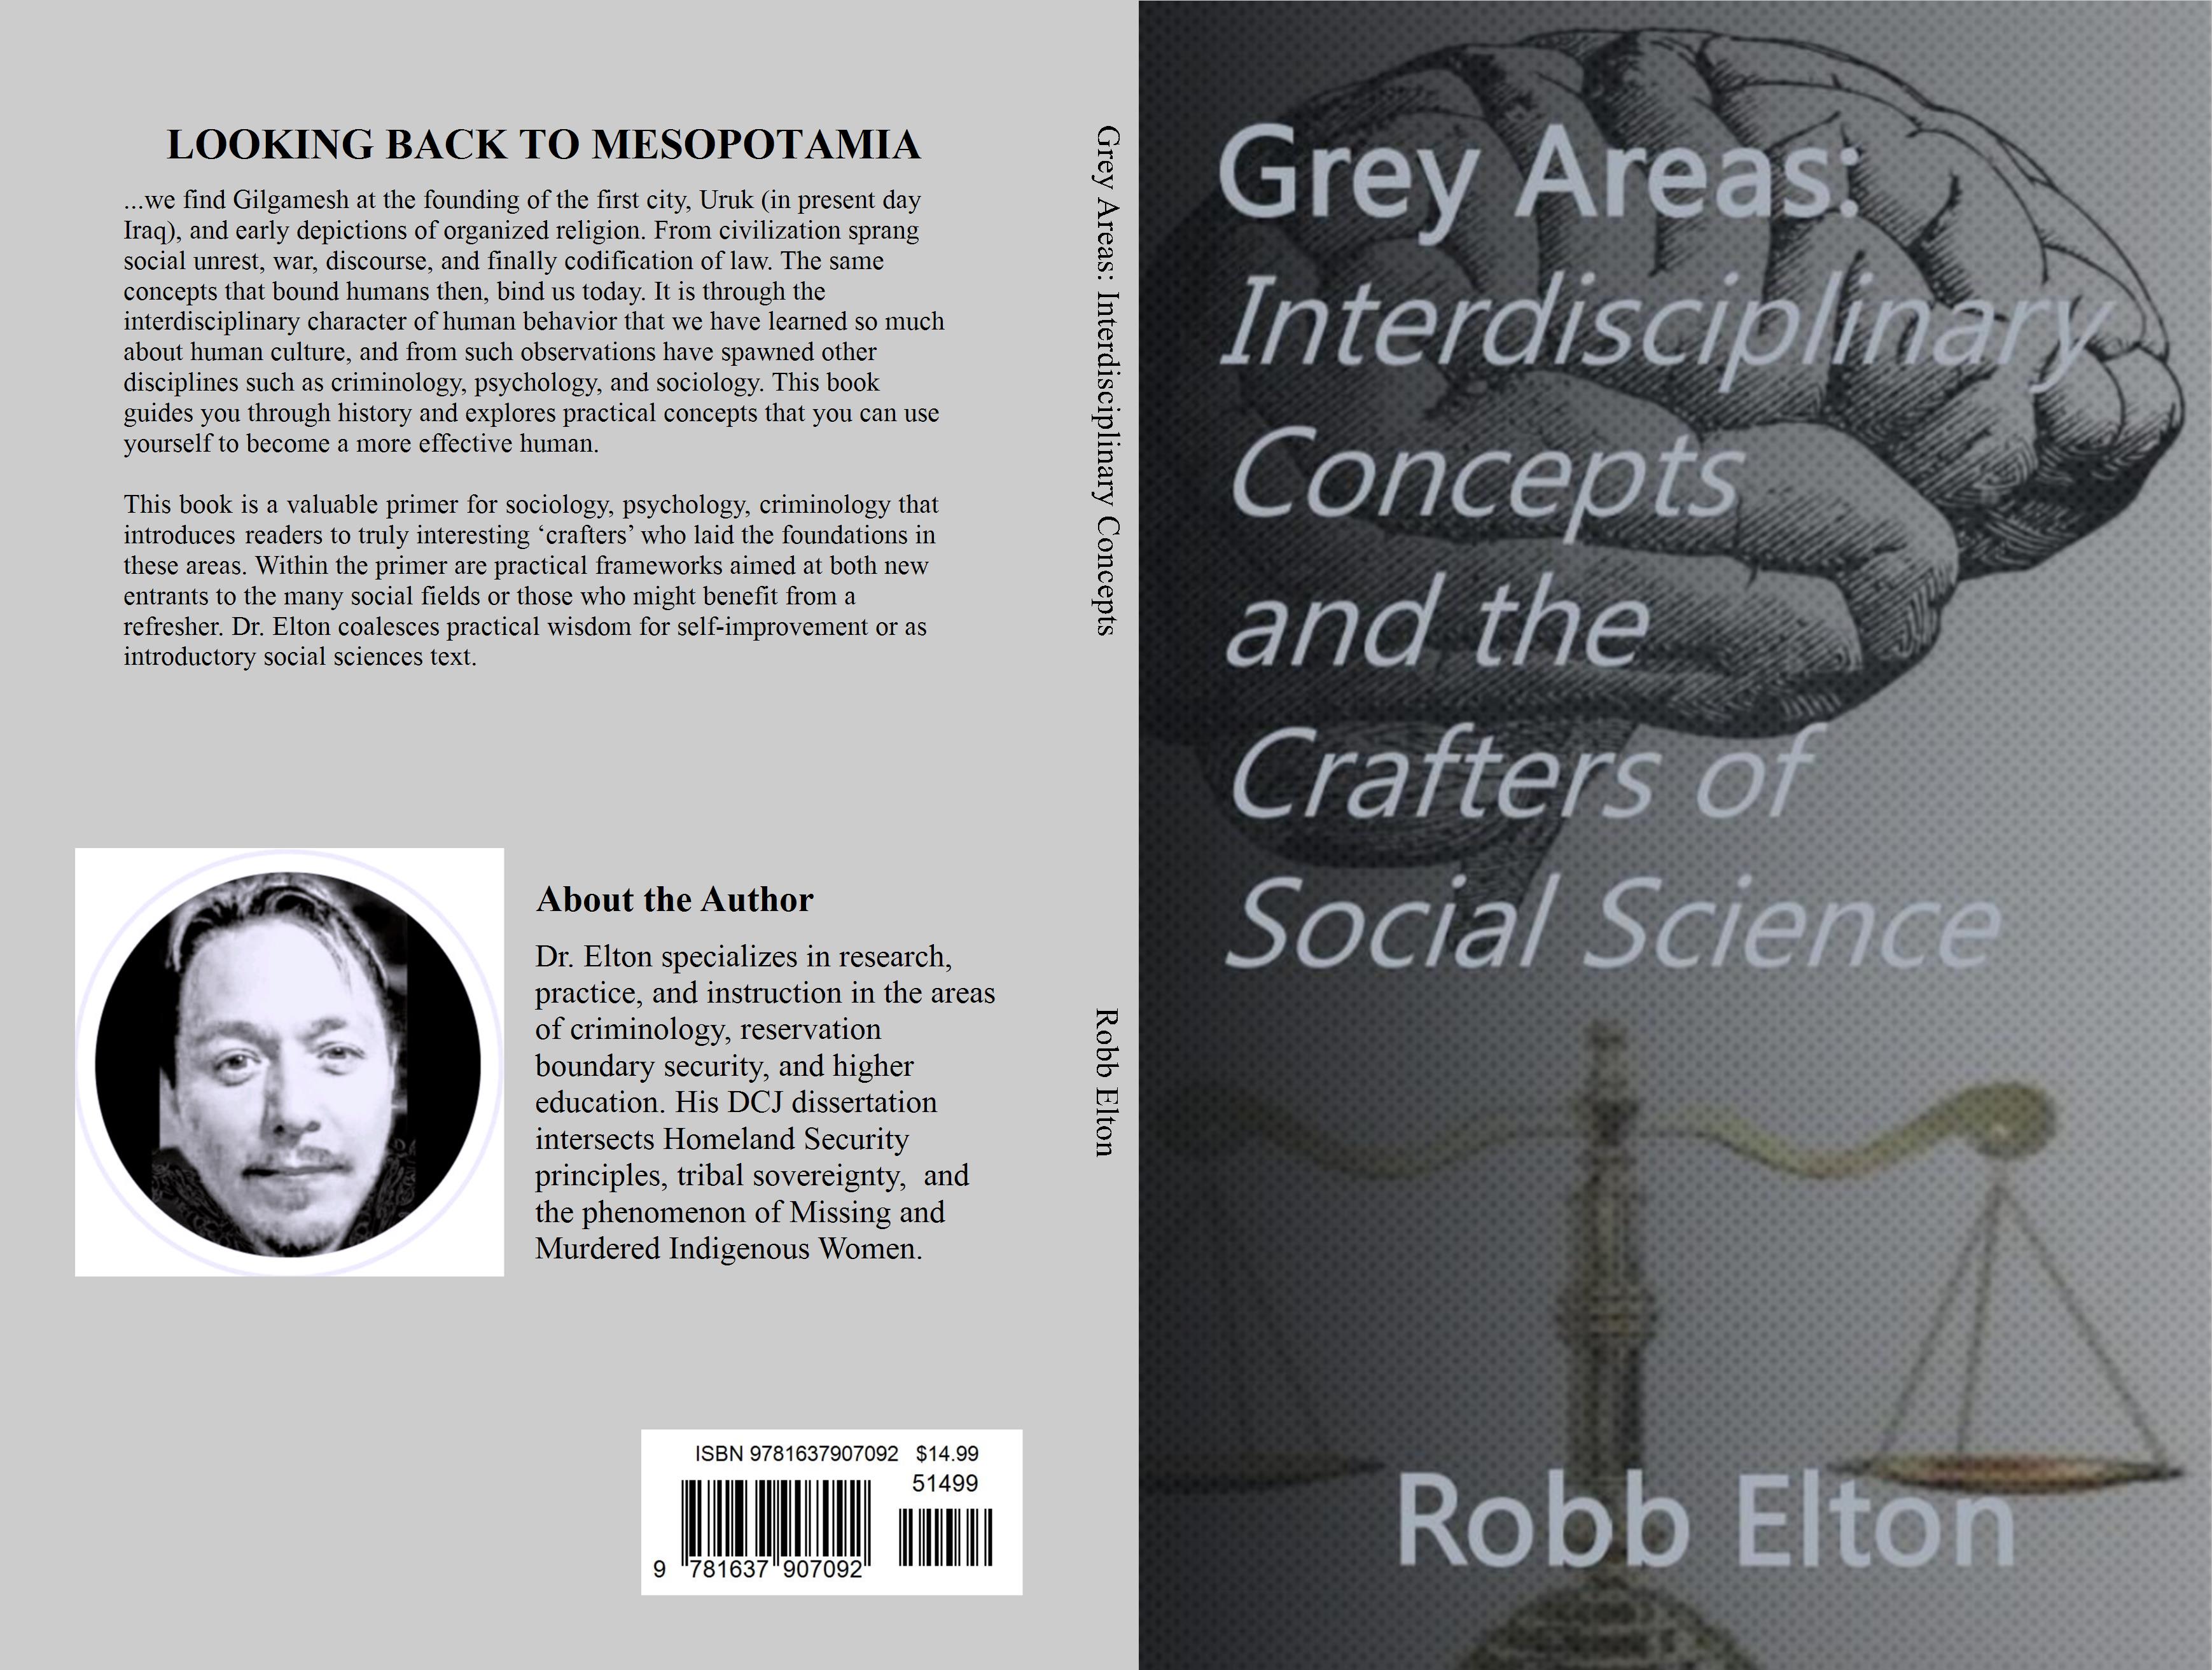 Grey Areas: Interdisciplinary Concepts and the Crafters of Social Science cover image